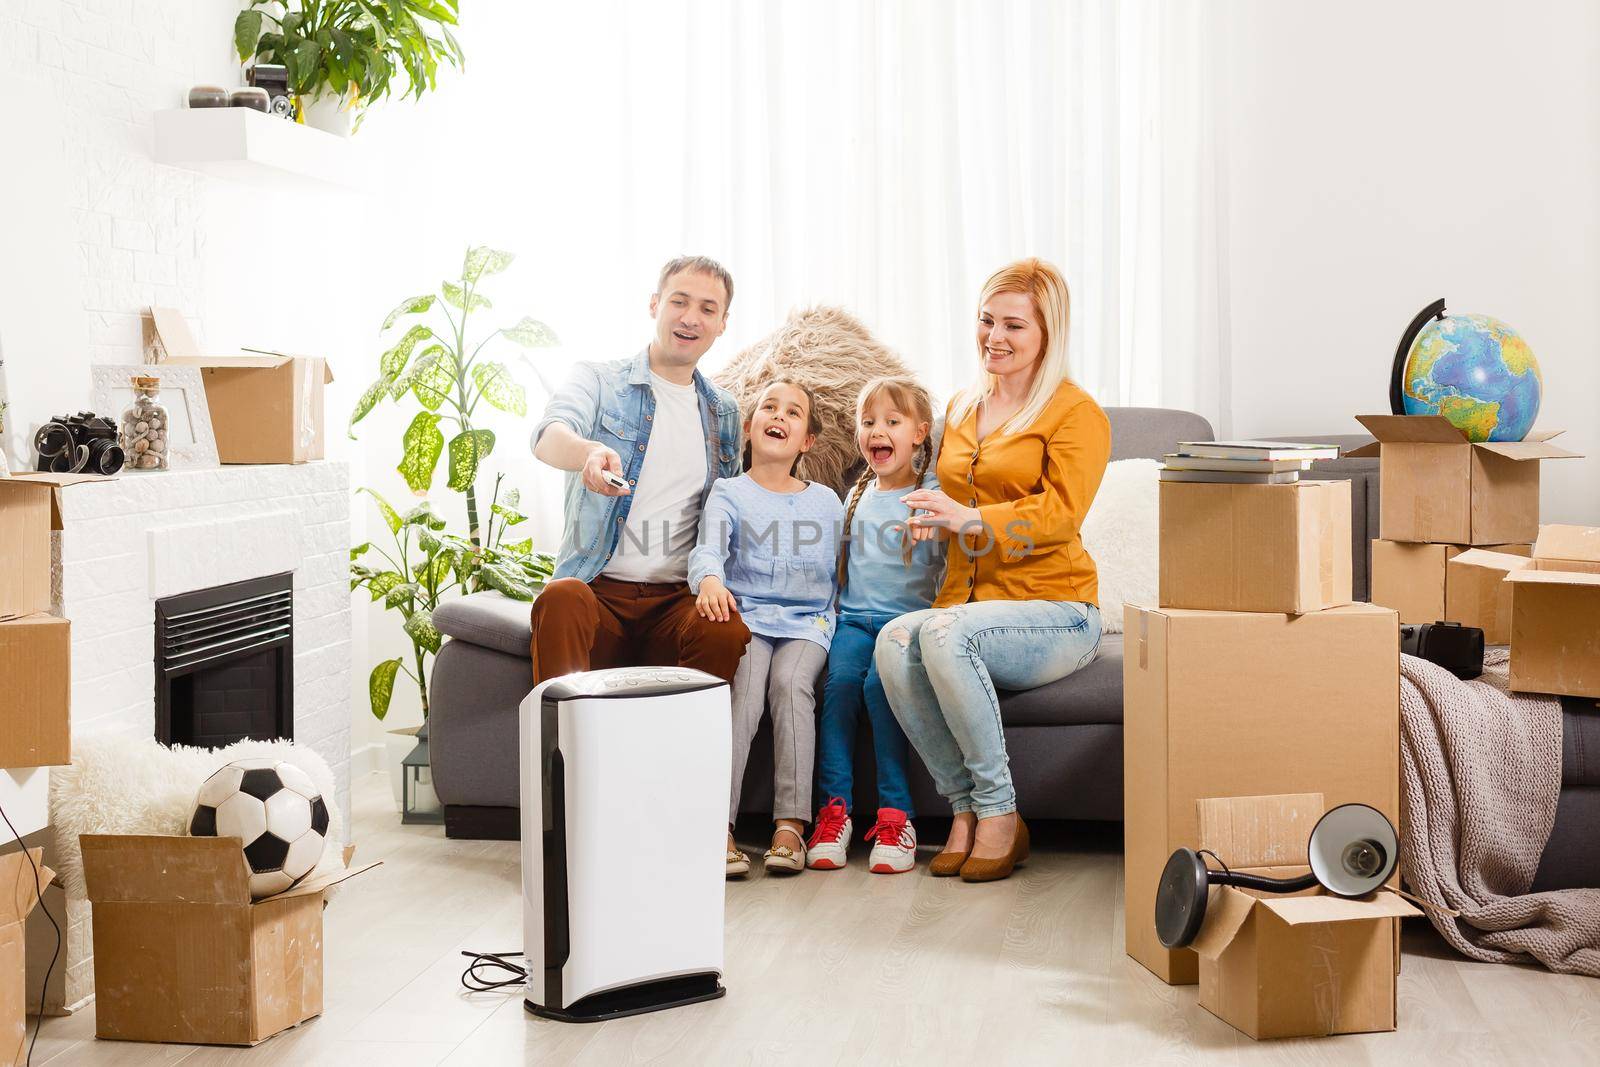 air purifier in living room with happy family moving to new apartment